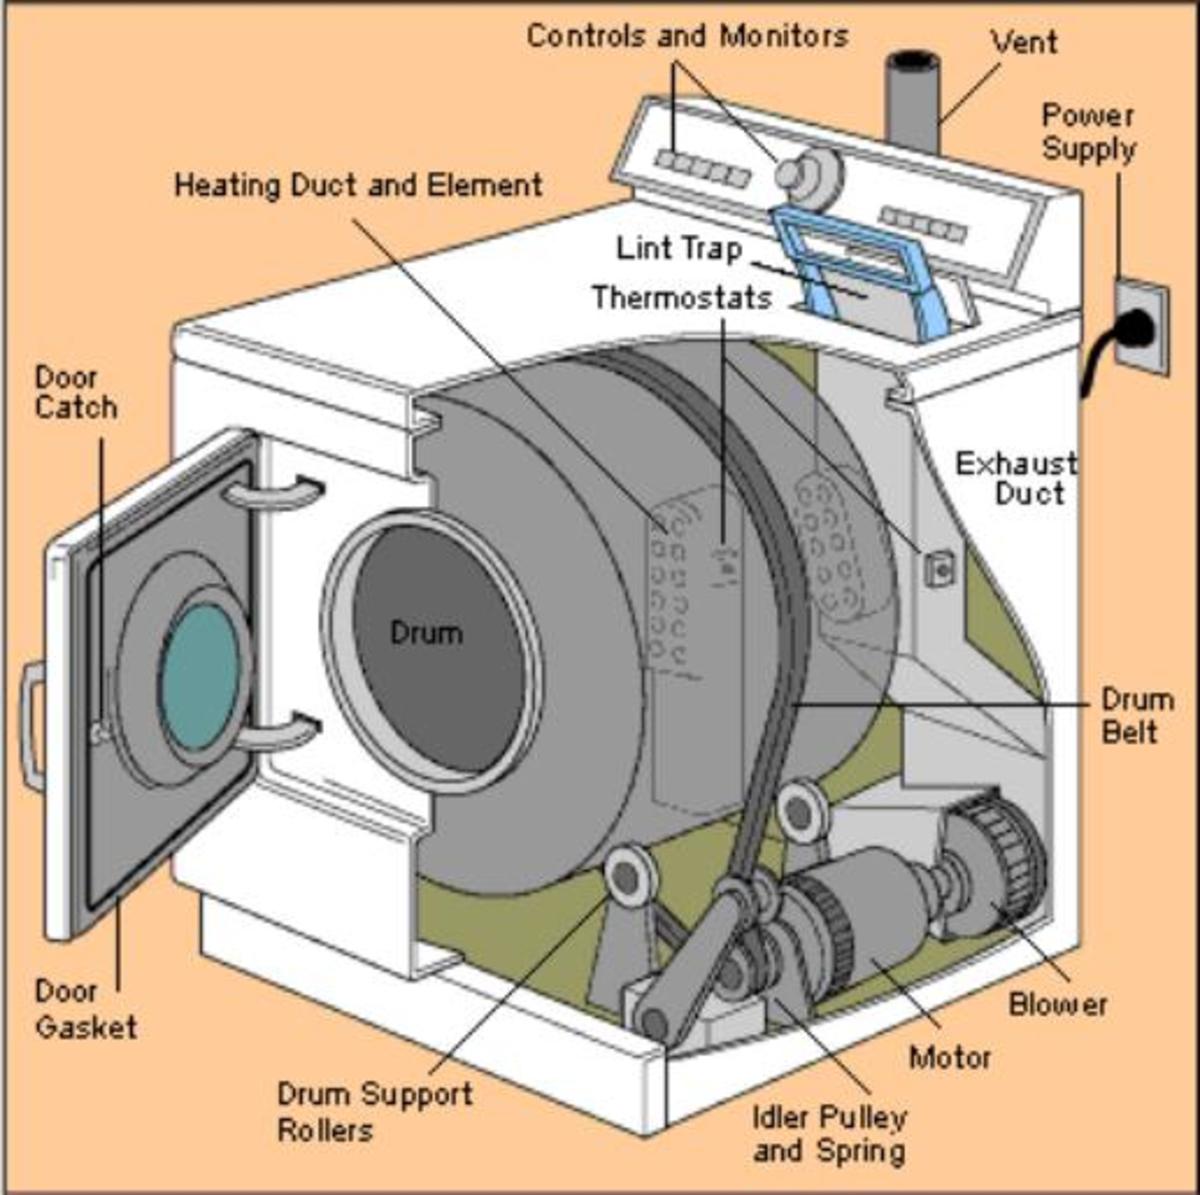 Clothes Dryer Repair for Loud Noises, Overheating, and Not